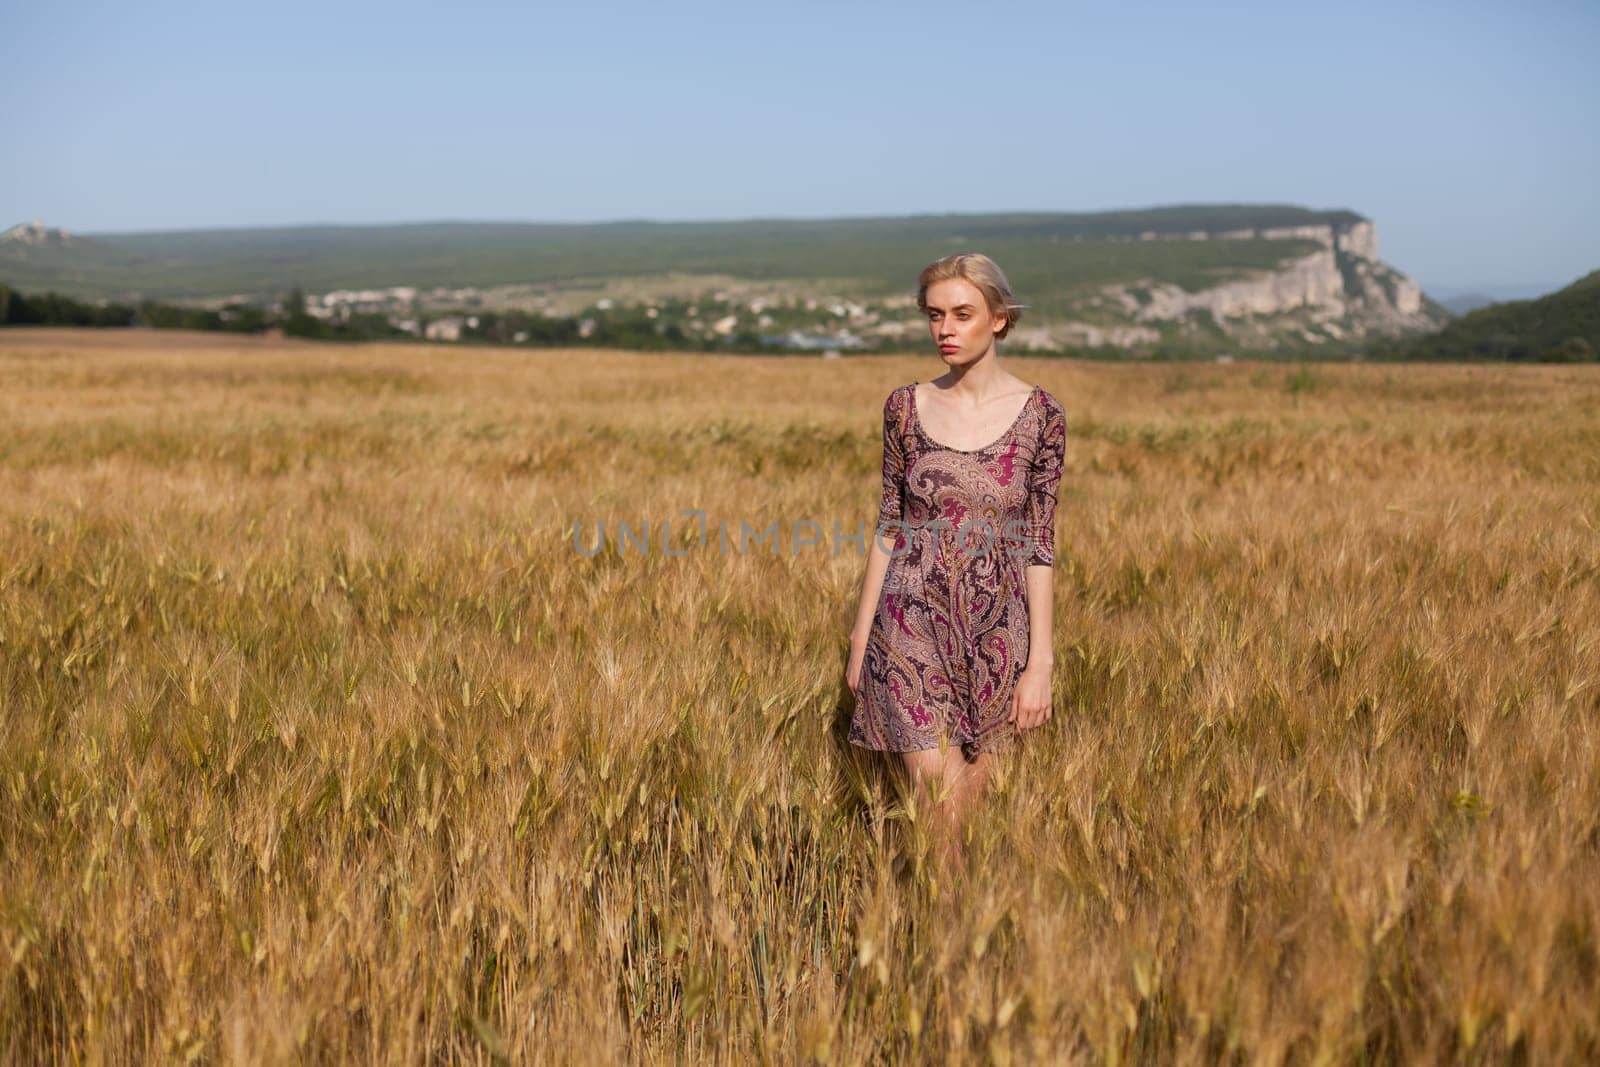 Portrait of a beautiful fashionable woman in a field before harvesting on the farm